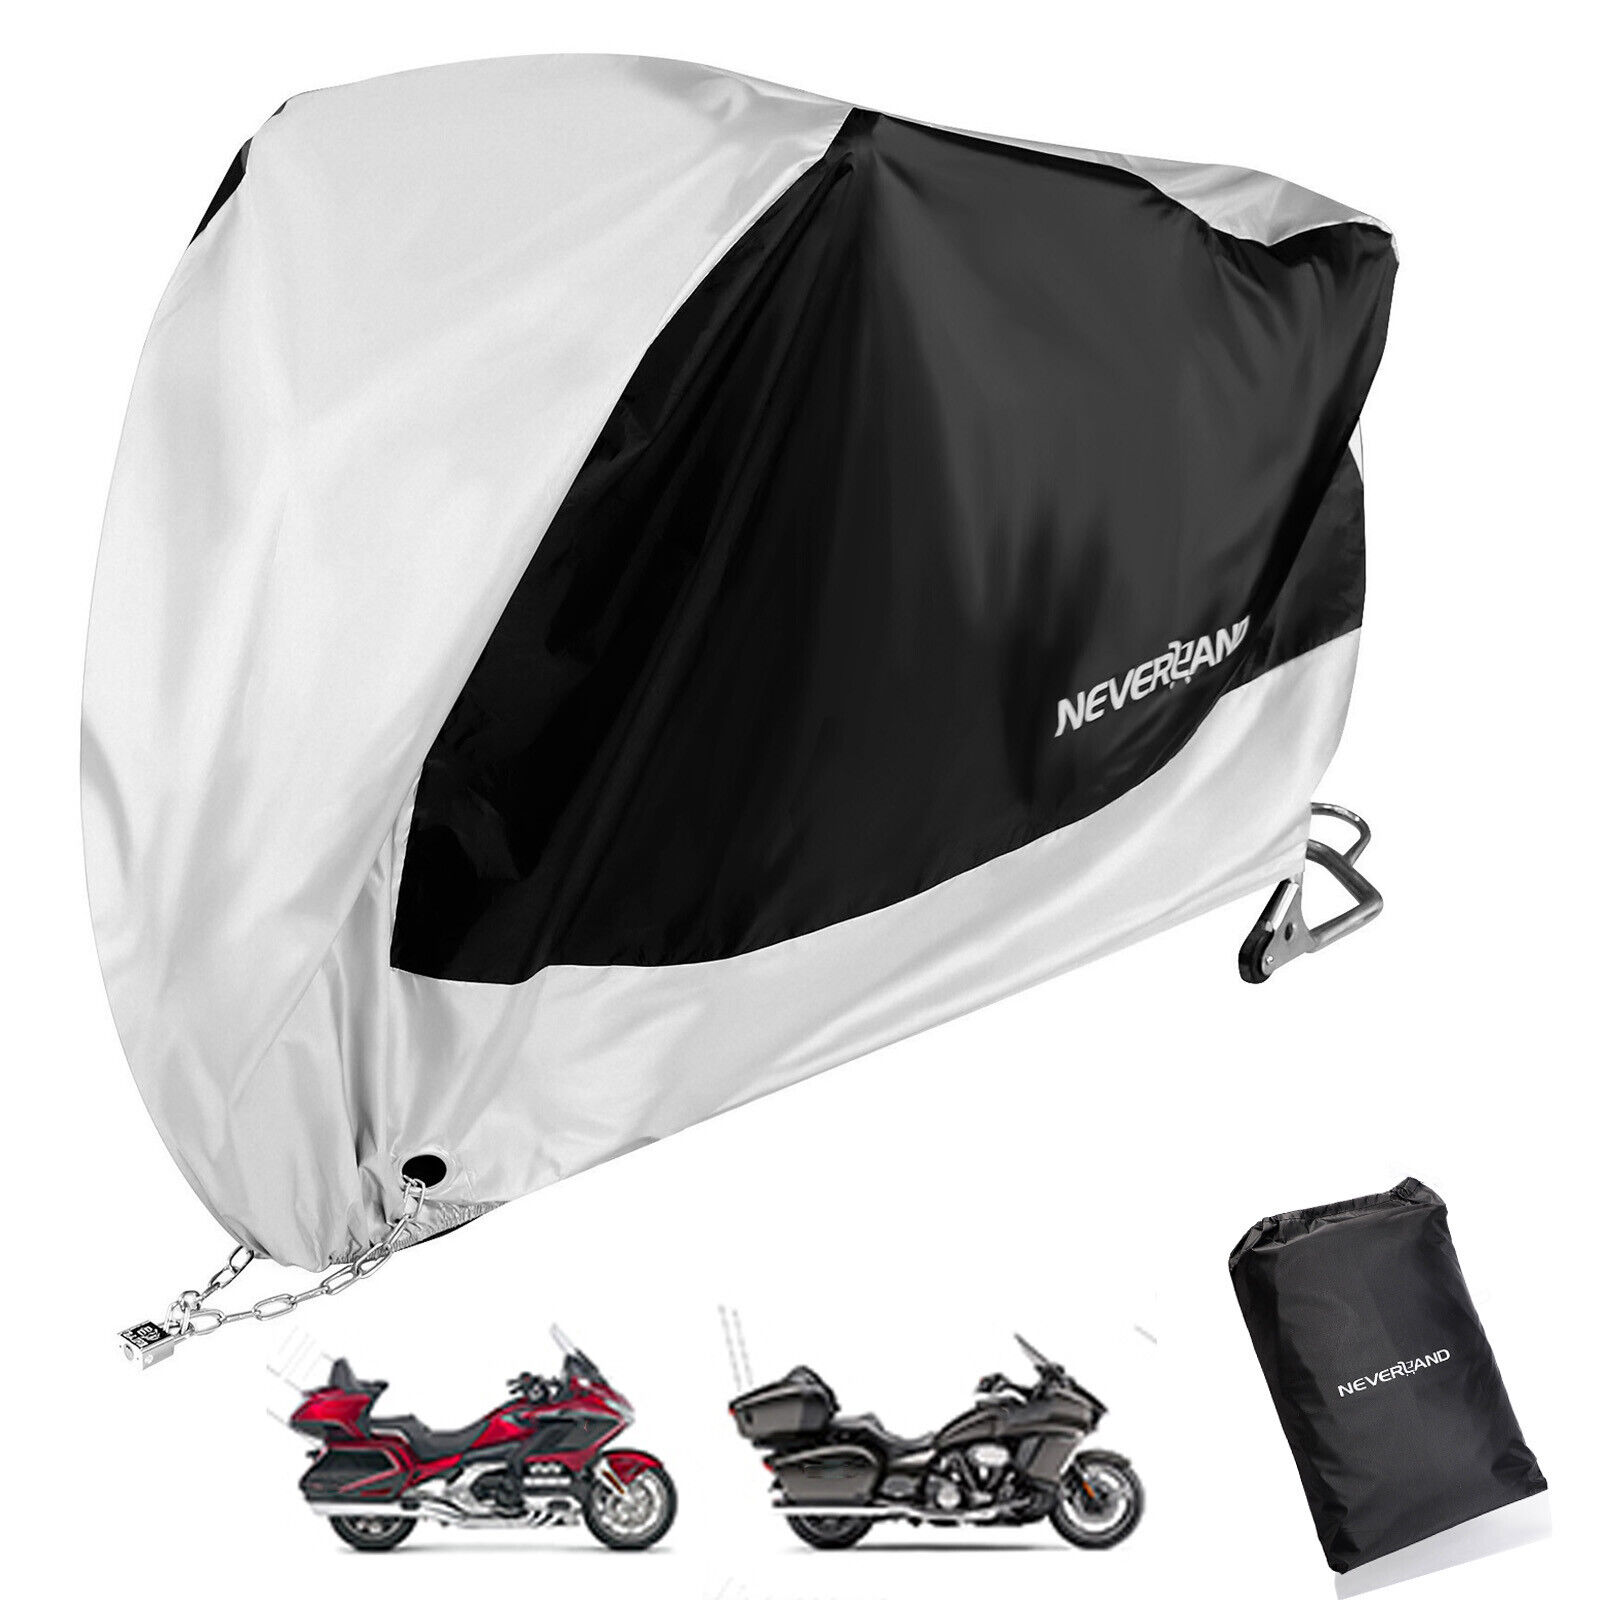 XXXL Motorcycle Cover Waterproof UV Protector Heavy Duty Fit For Honda Goldwing